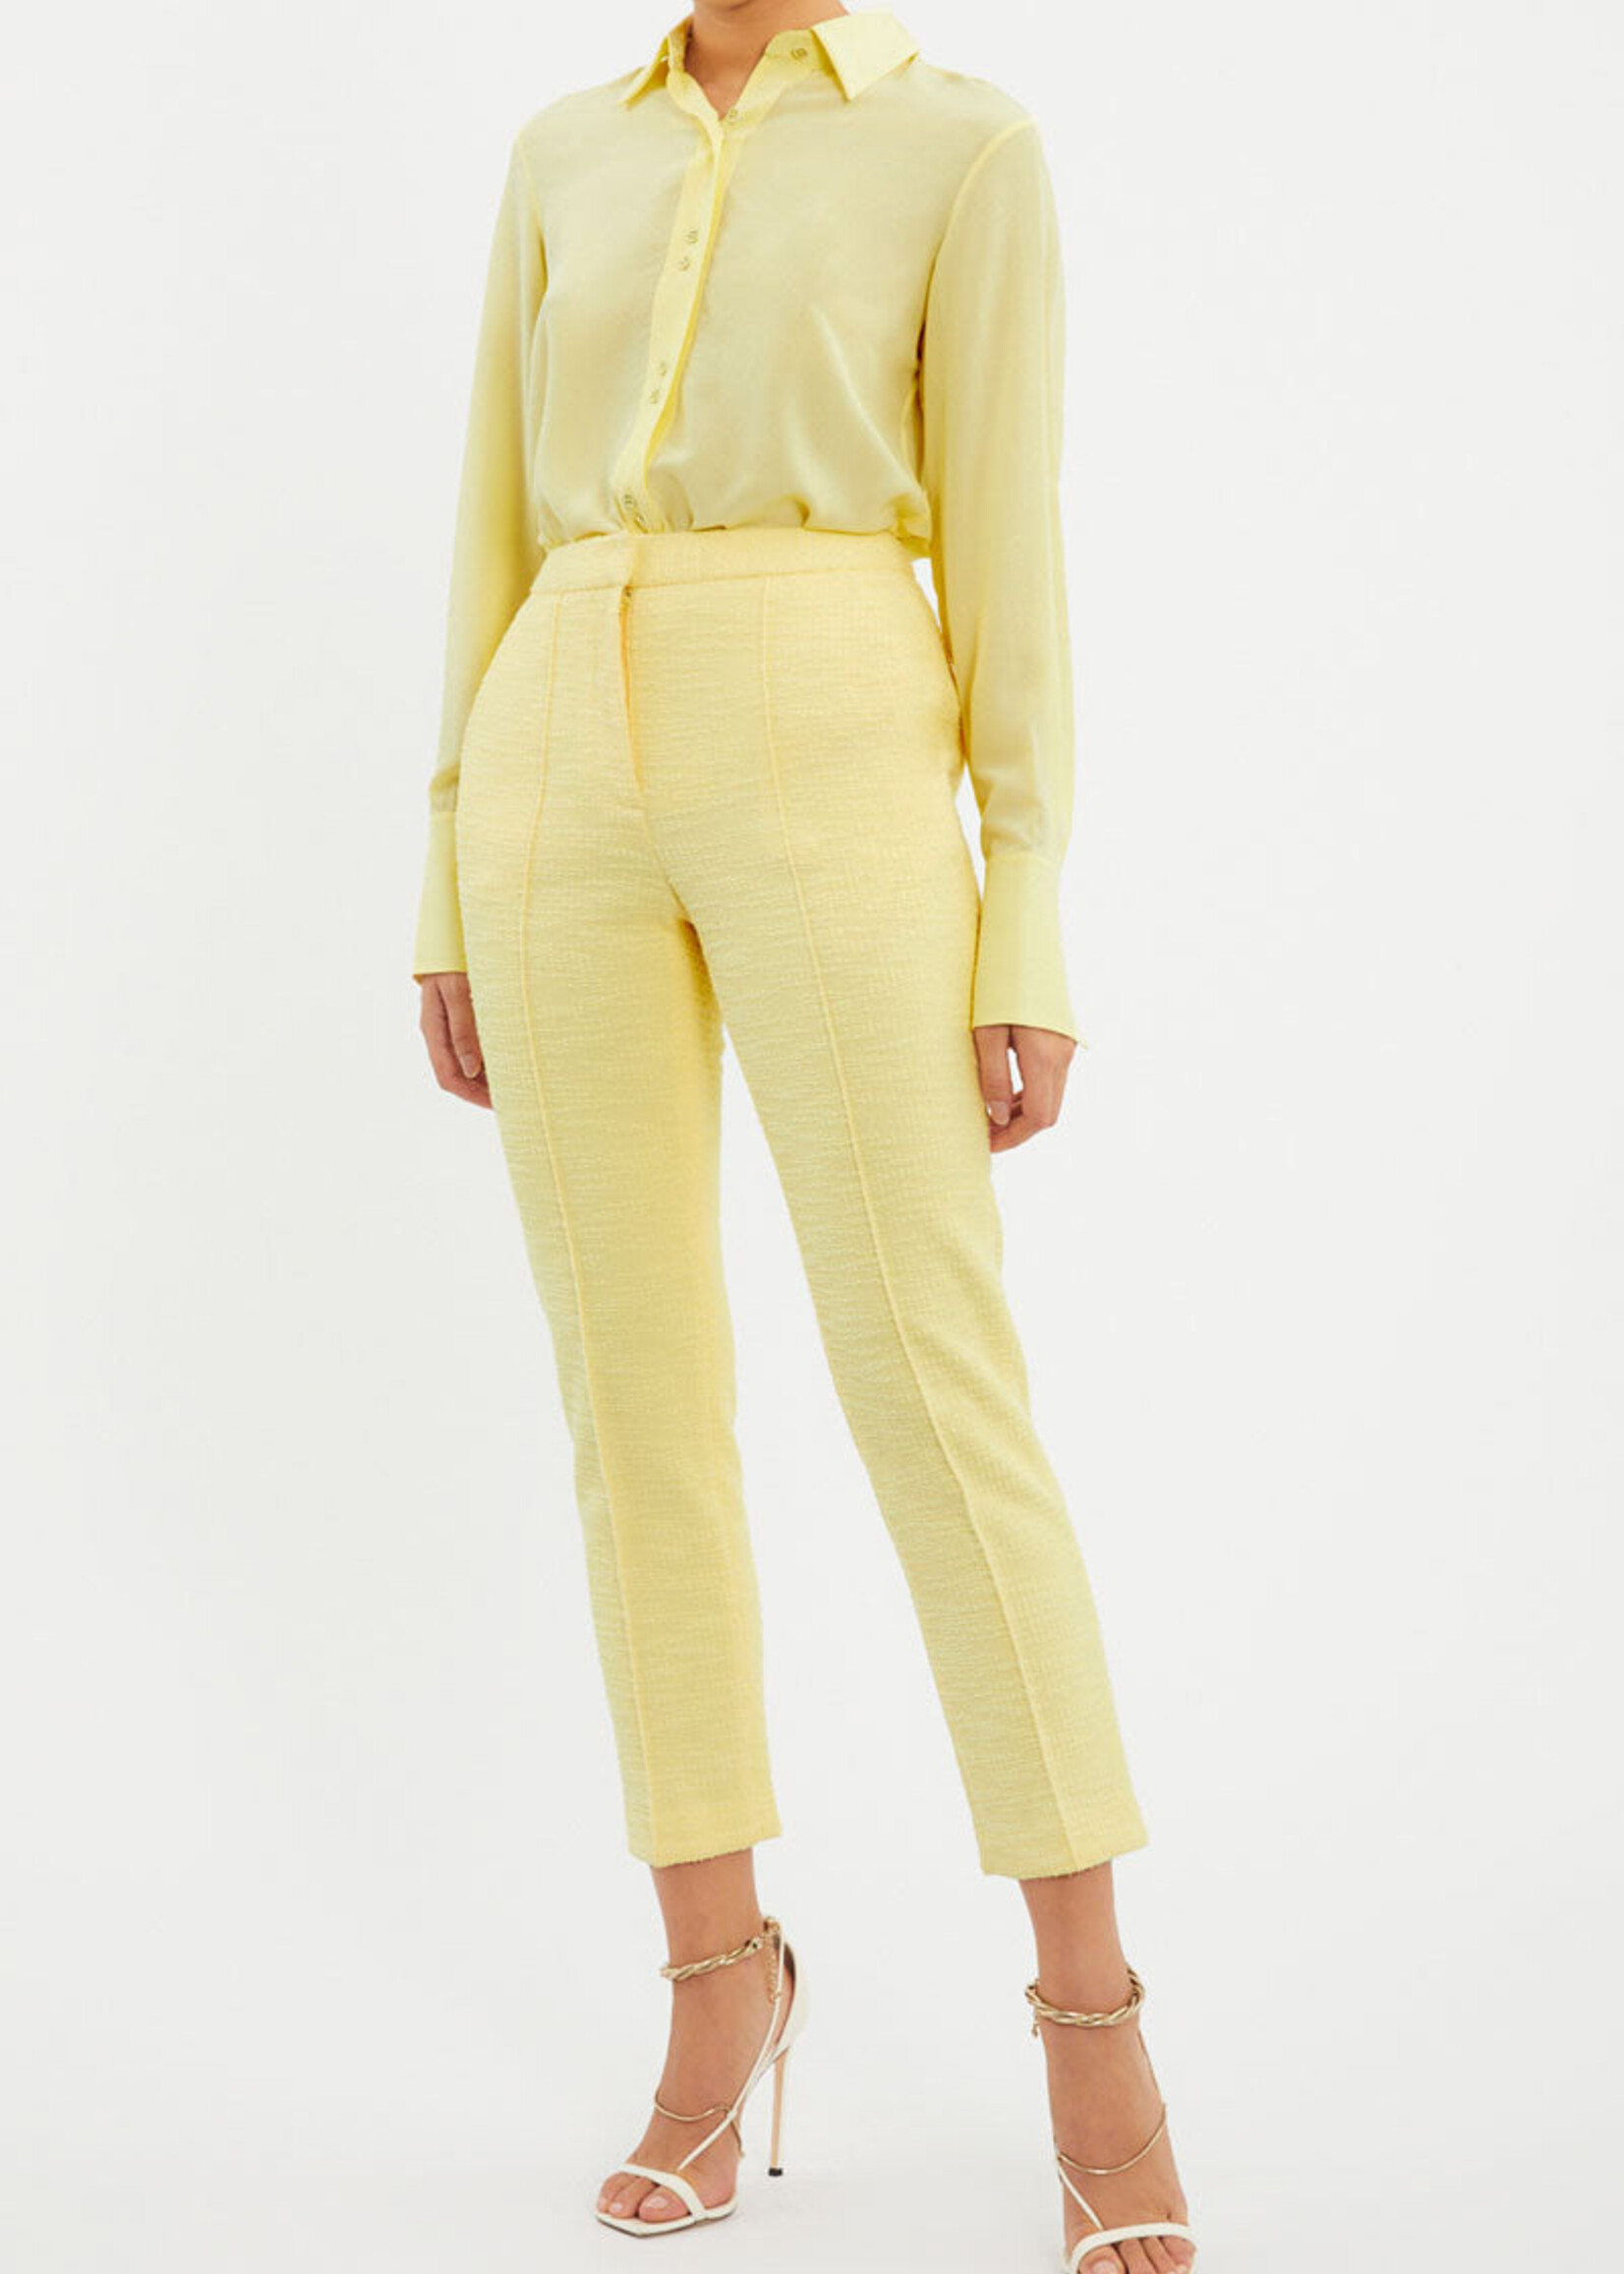 REBECCA VALLANCE CLAIRE TAPERED PANT